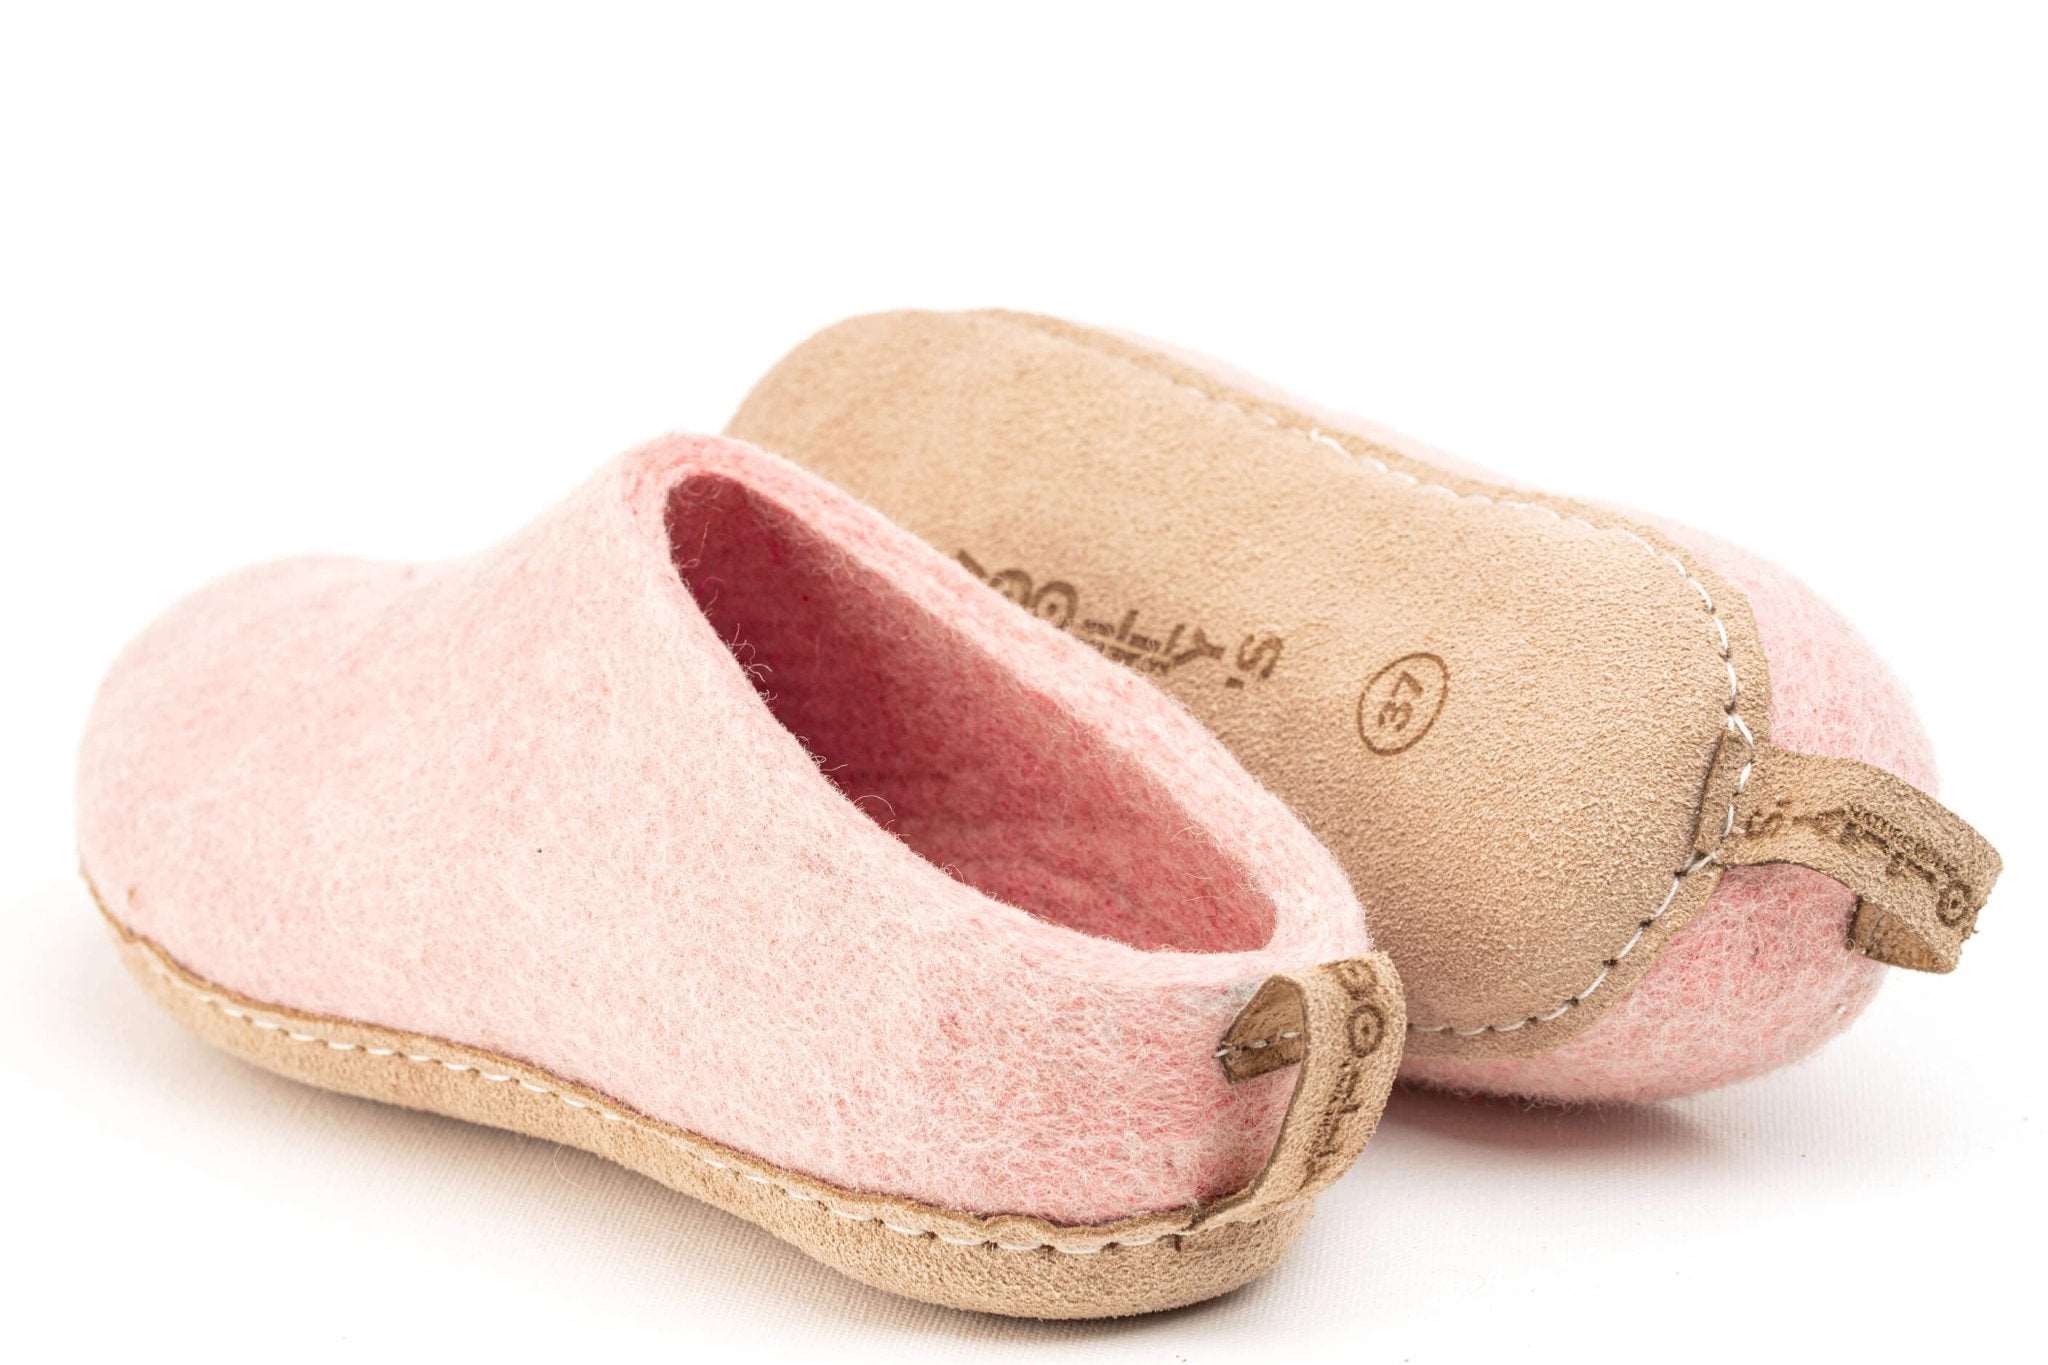 Indoor Open Heel Slippers With Leather Sole - Baby Pink - Woollyes